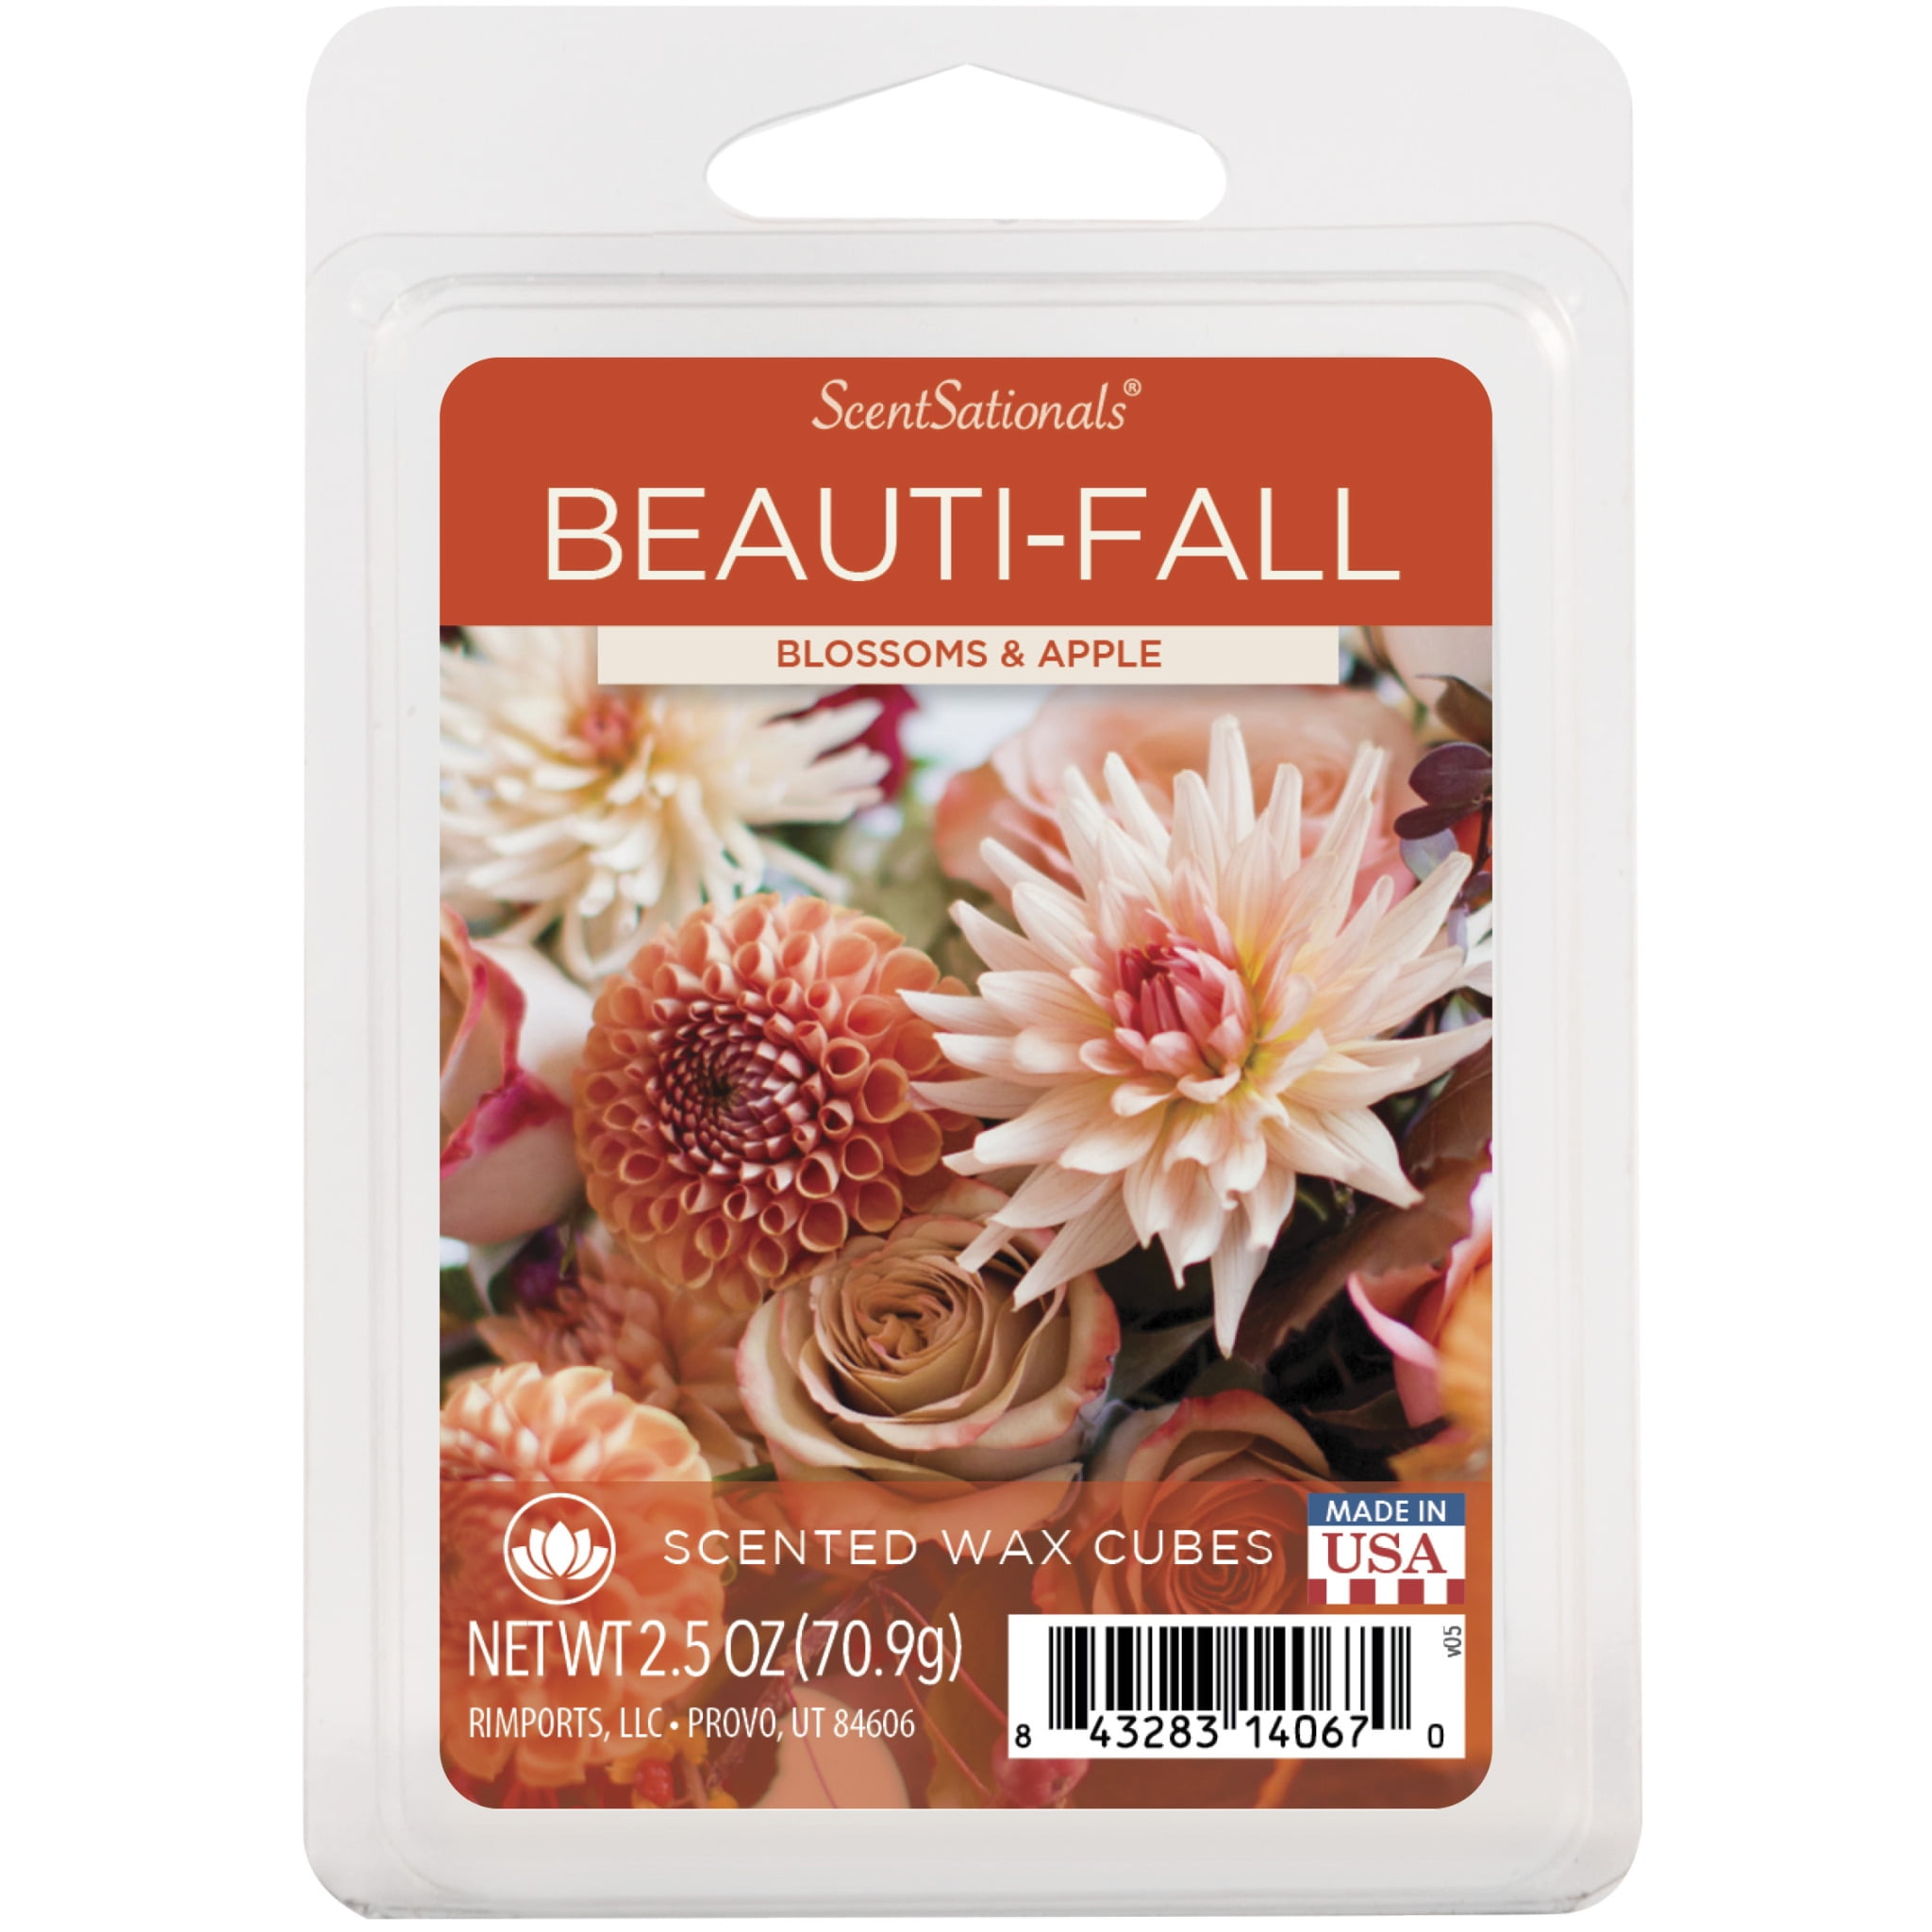 Beauti-Fall Scented Wax Melts, ScentSationals, 2.5 oz (1-Pack